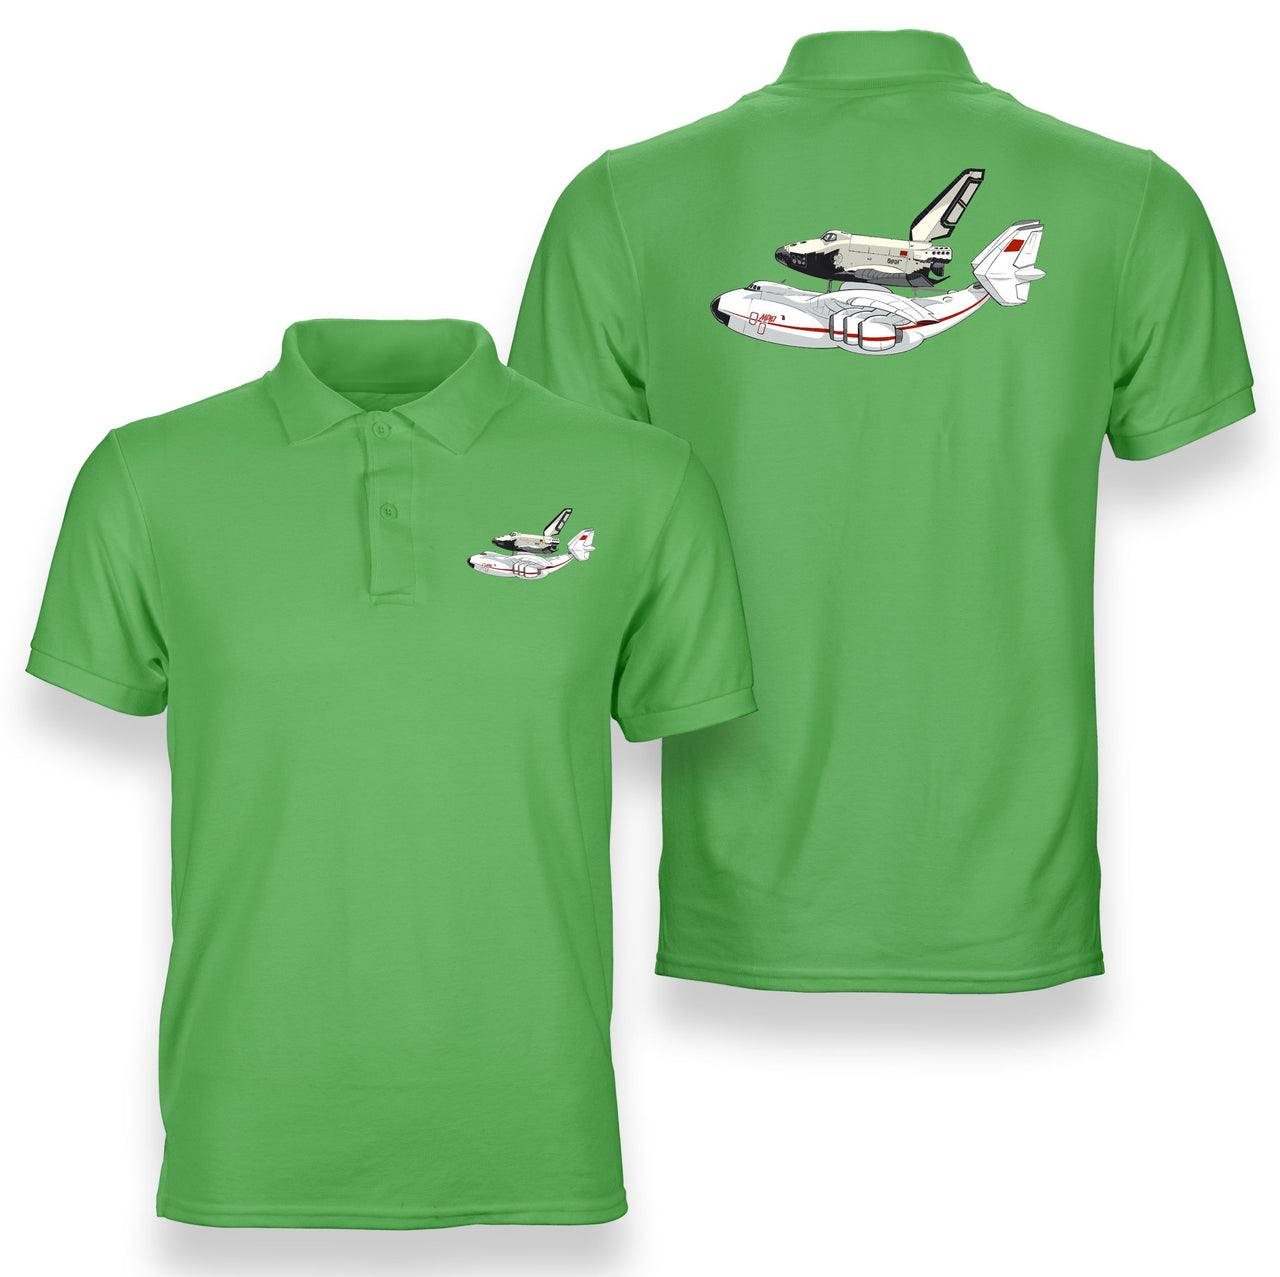 Buran & An-225 Designed Double Side Polo T-Shirts